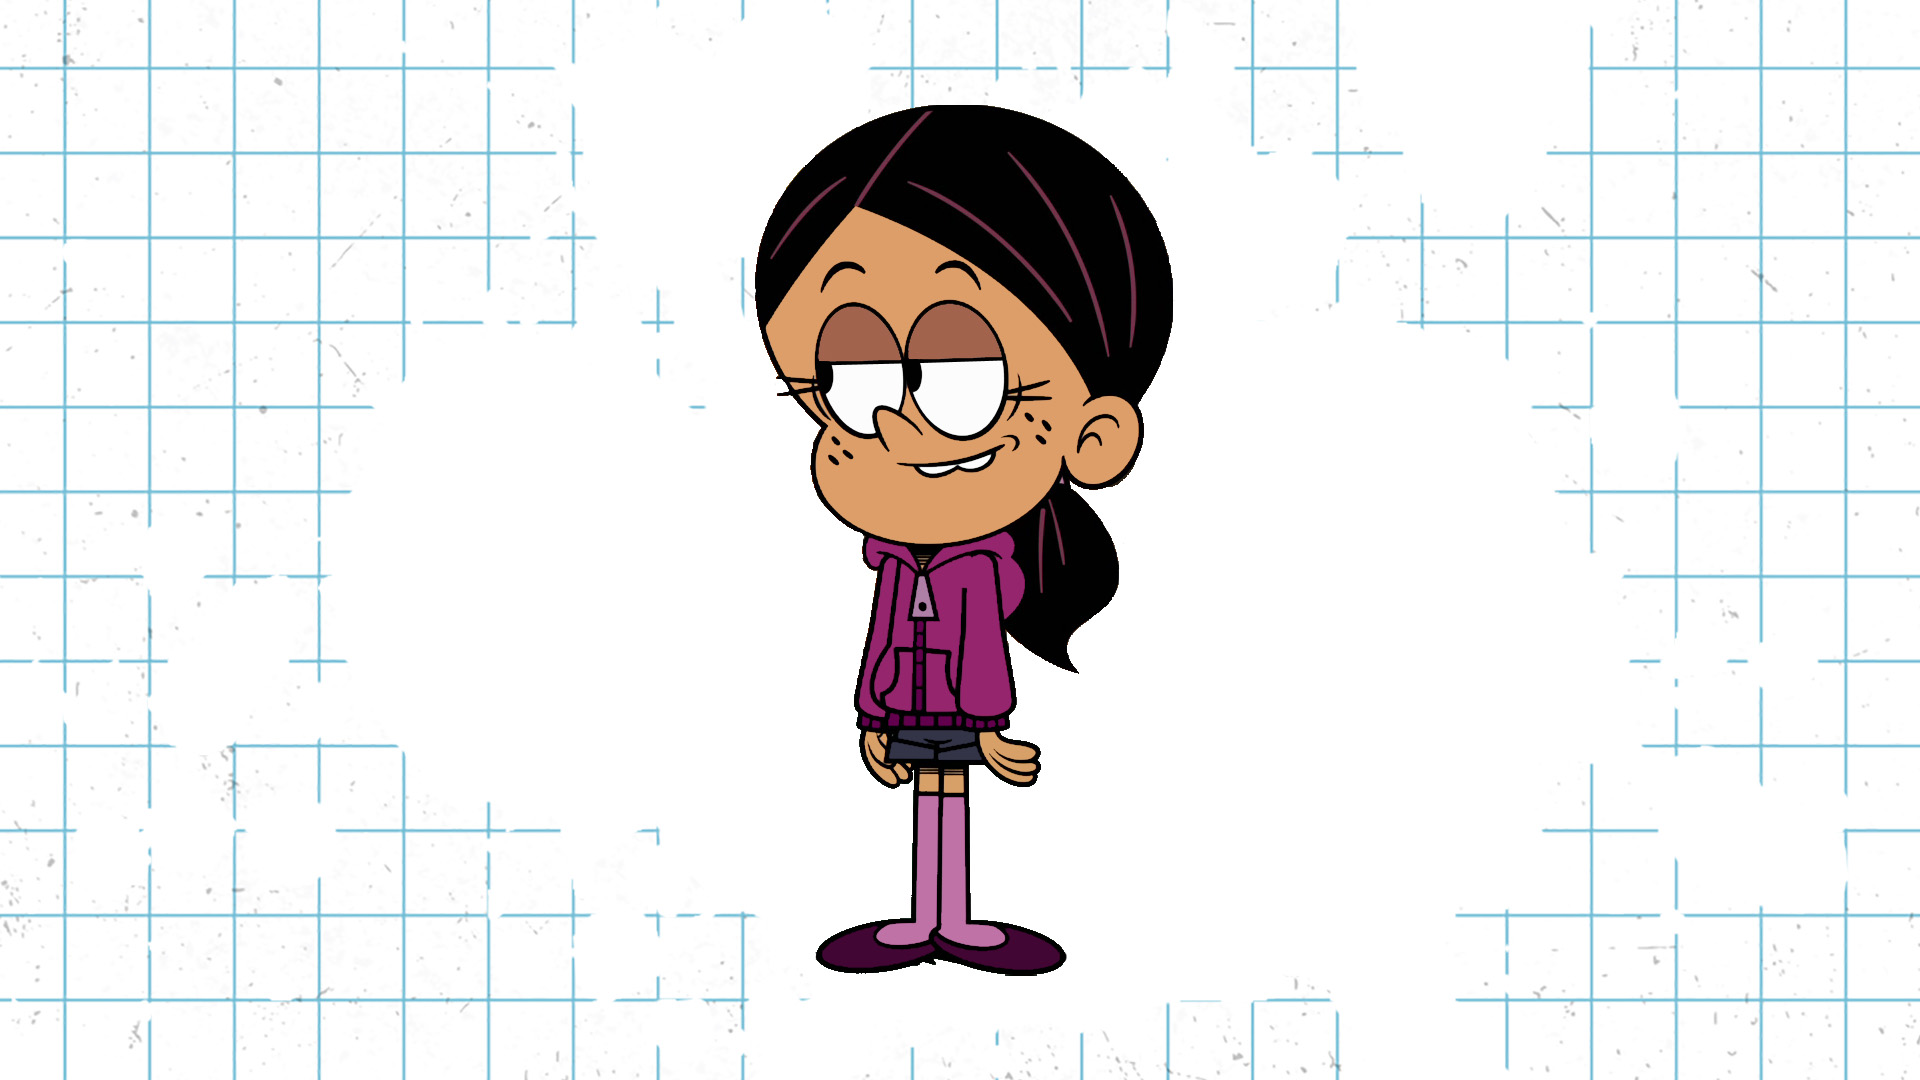 A Loud House character with long dark hair